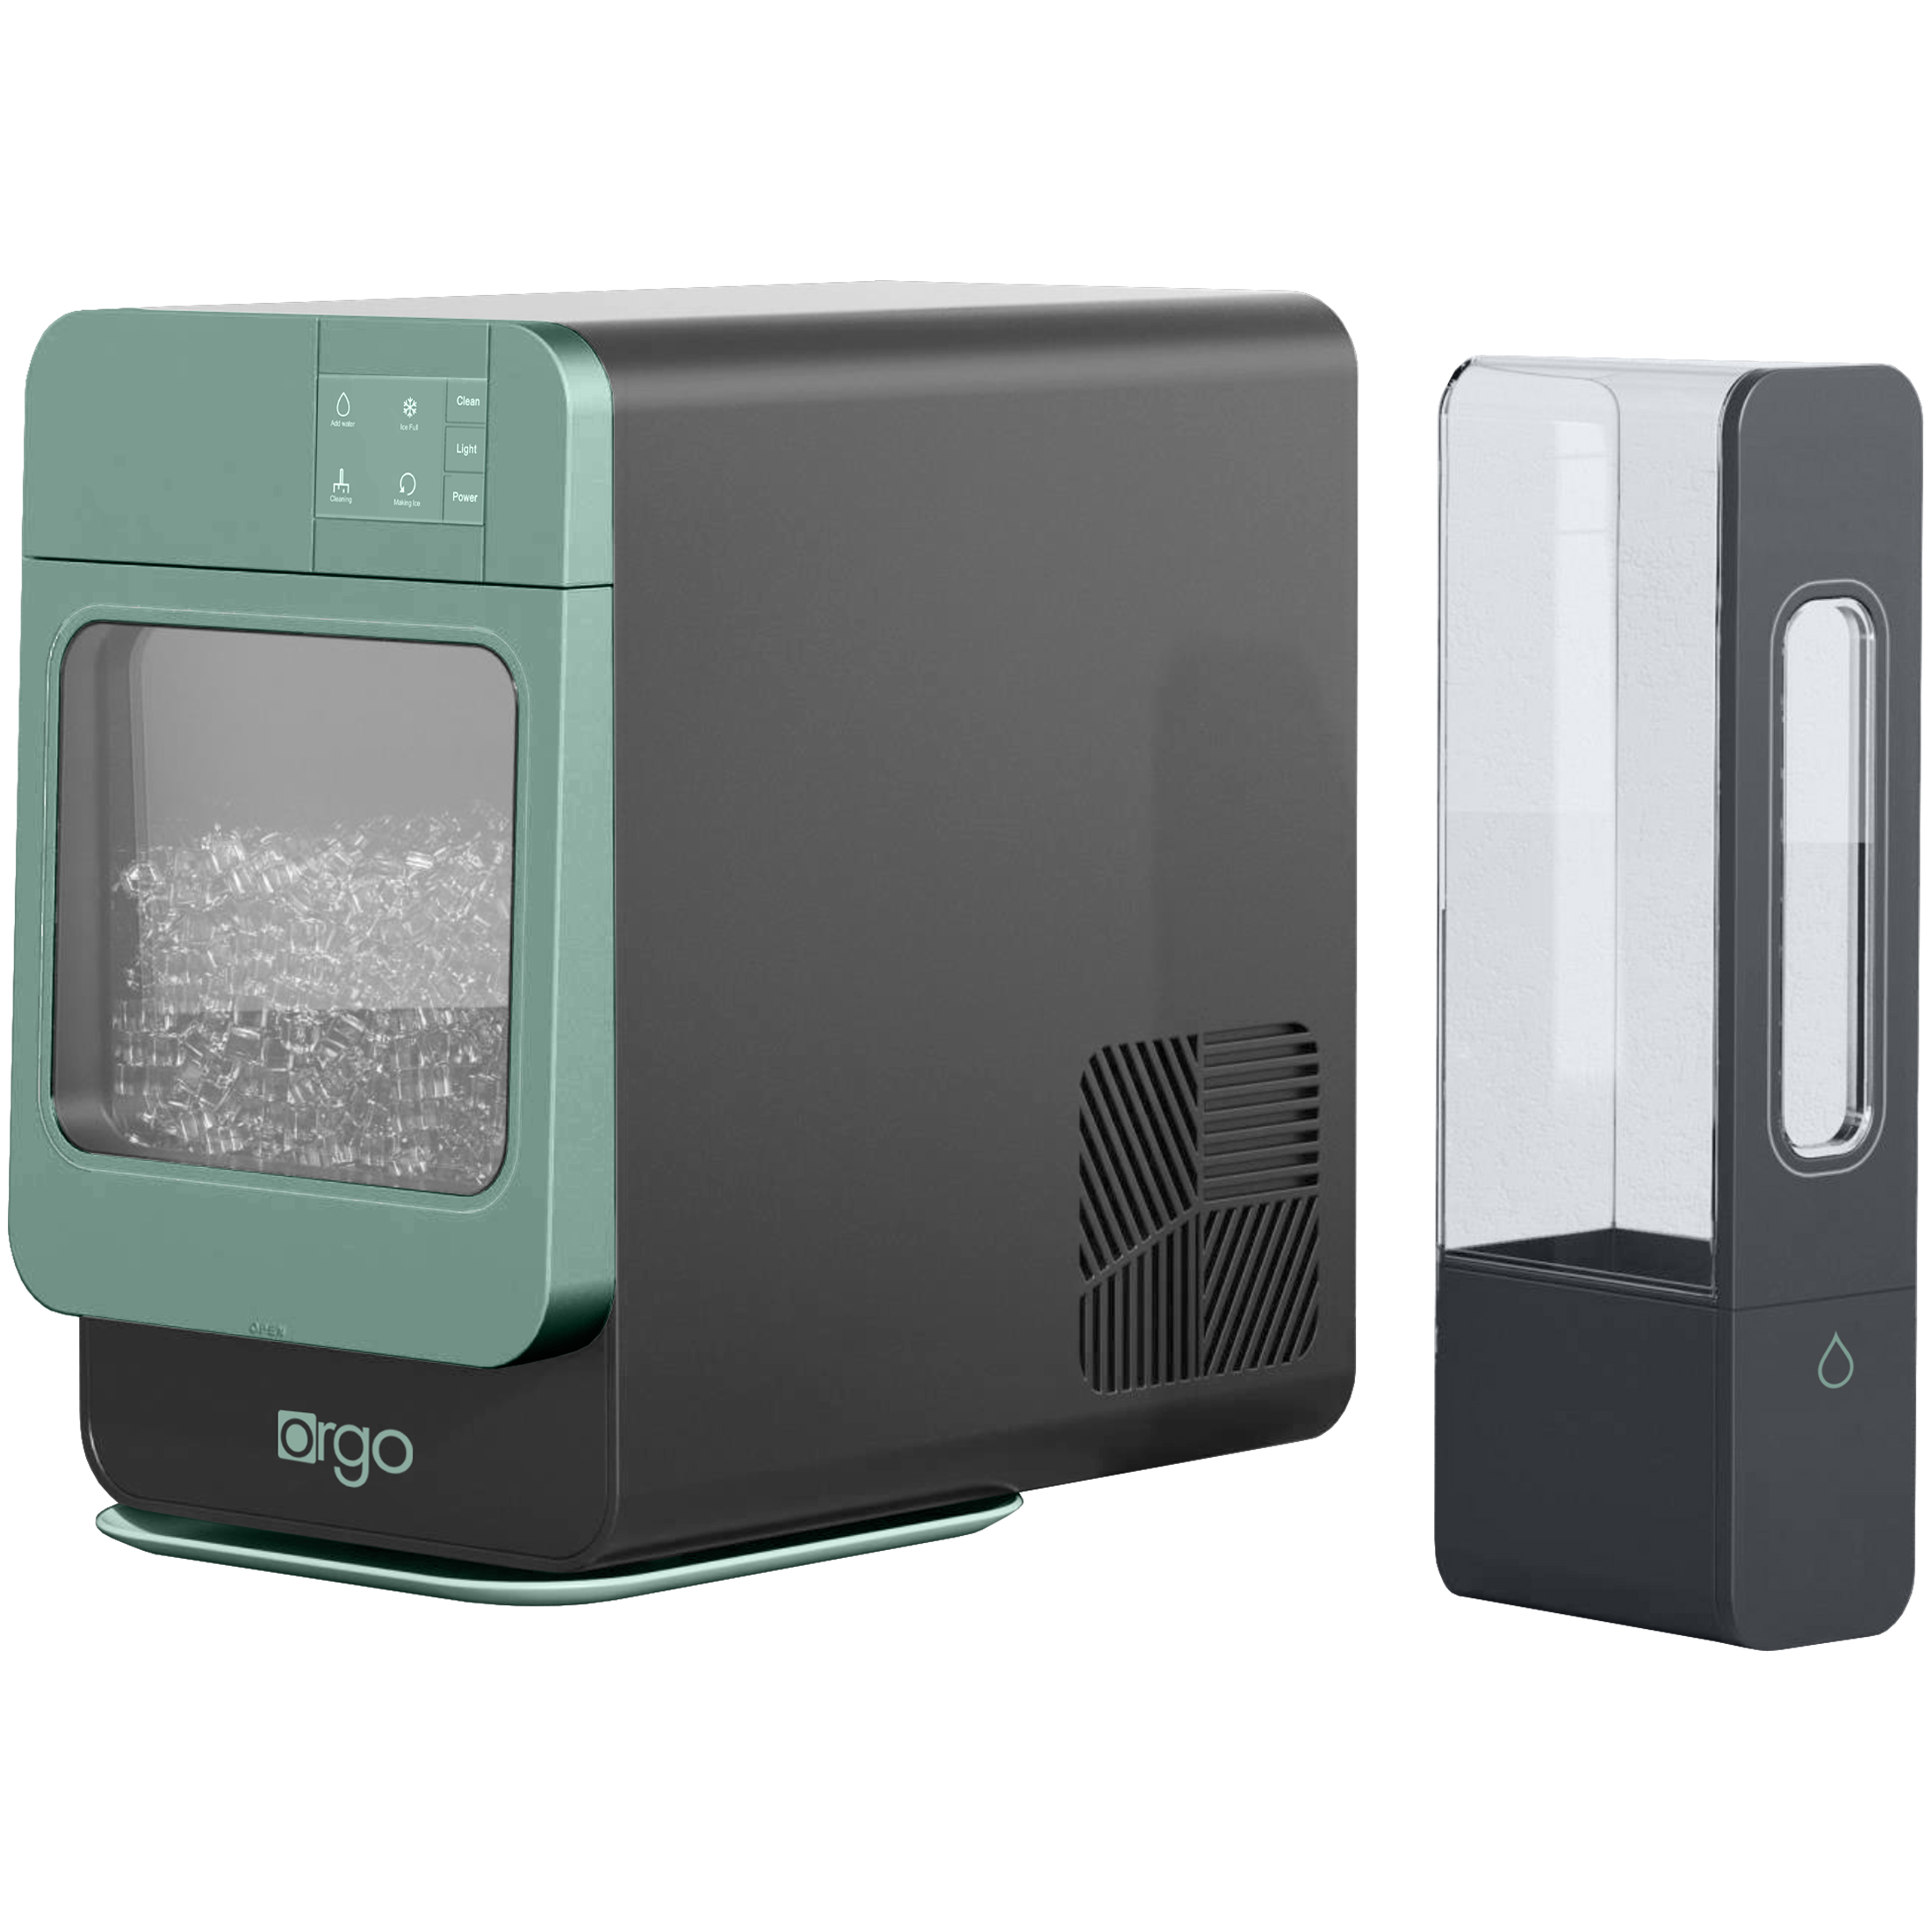 Orgo Products Sonic Countertop Ice Maker, Nugget Ice Type, Sage - image 3 of 9